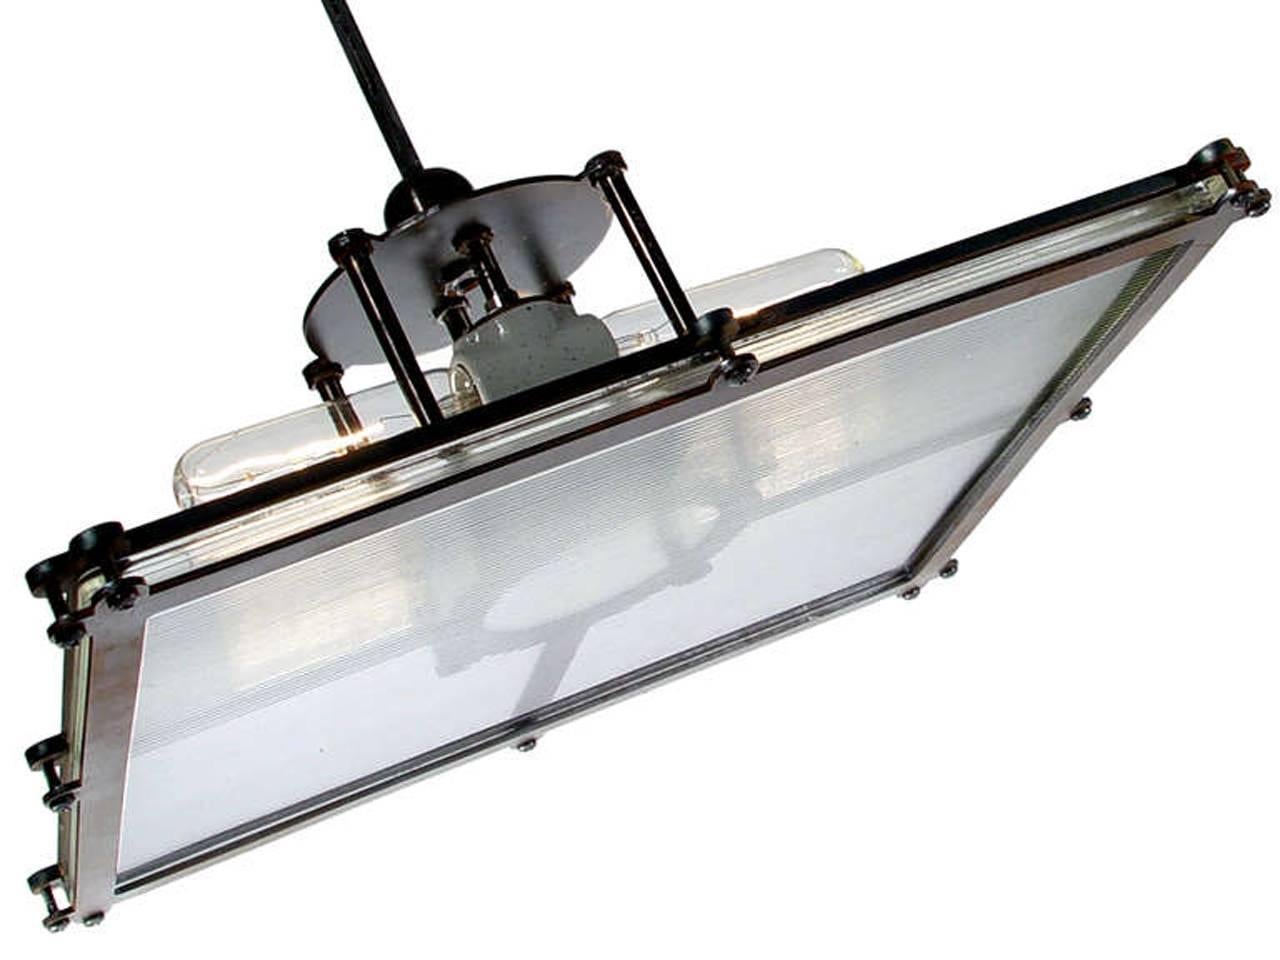 This oversized pendant features a substantial 15"x 17" prismatic glass plate. The prismatic design casts a beautiful 3D glow. The lamp has a heavy blackened brass and steel frame and is lit buy four floating horizontal tubular bulbs using